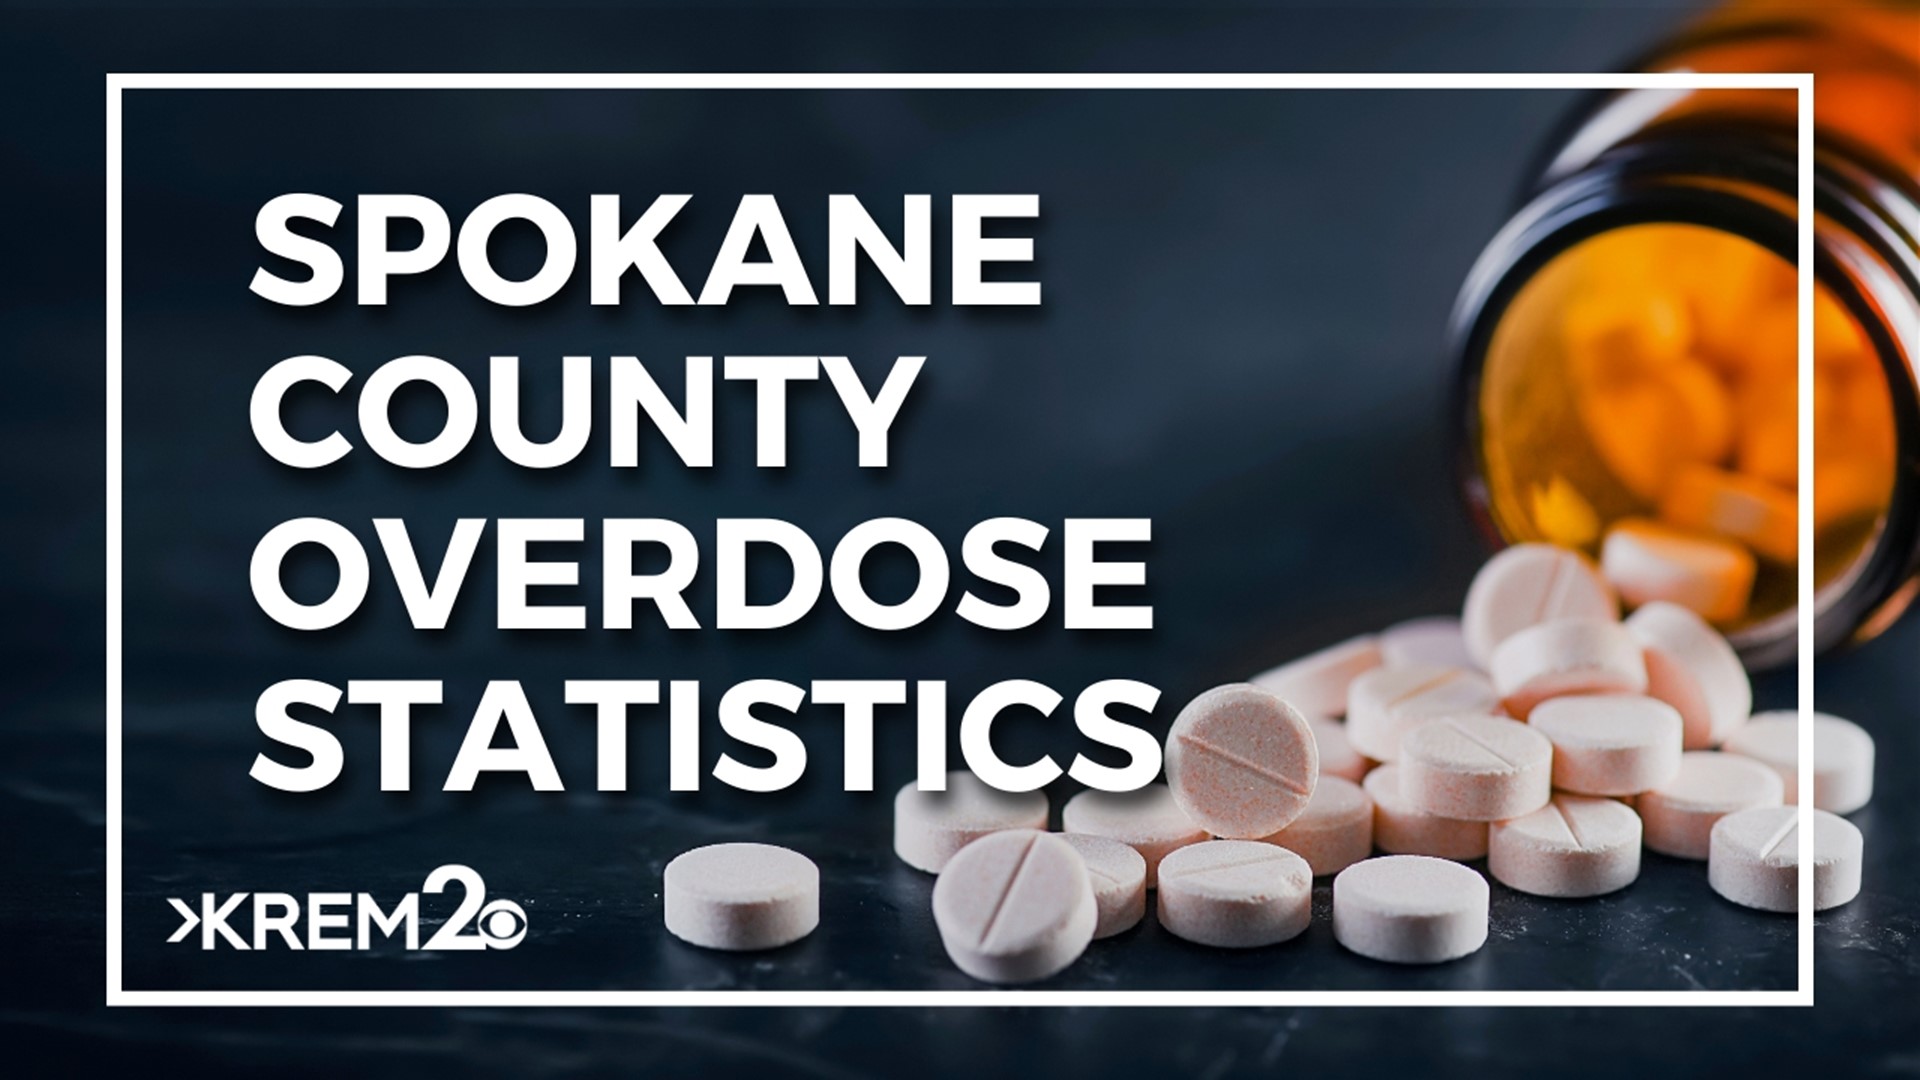 The DOH's new drug overdose dashboard features statewide, regional and county level data on drug-related hospitalizations and deaths ranging from 2016 to 2021.